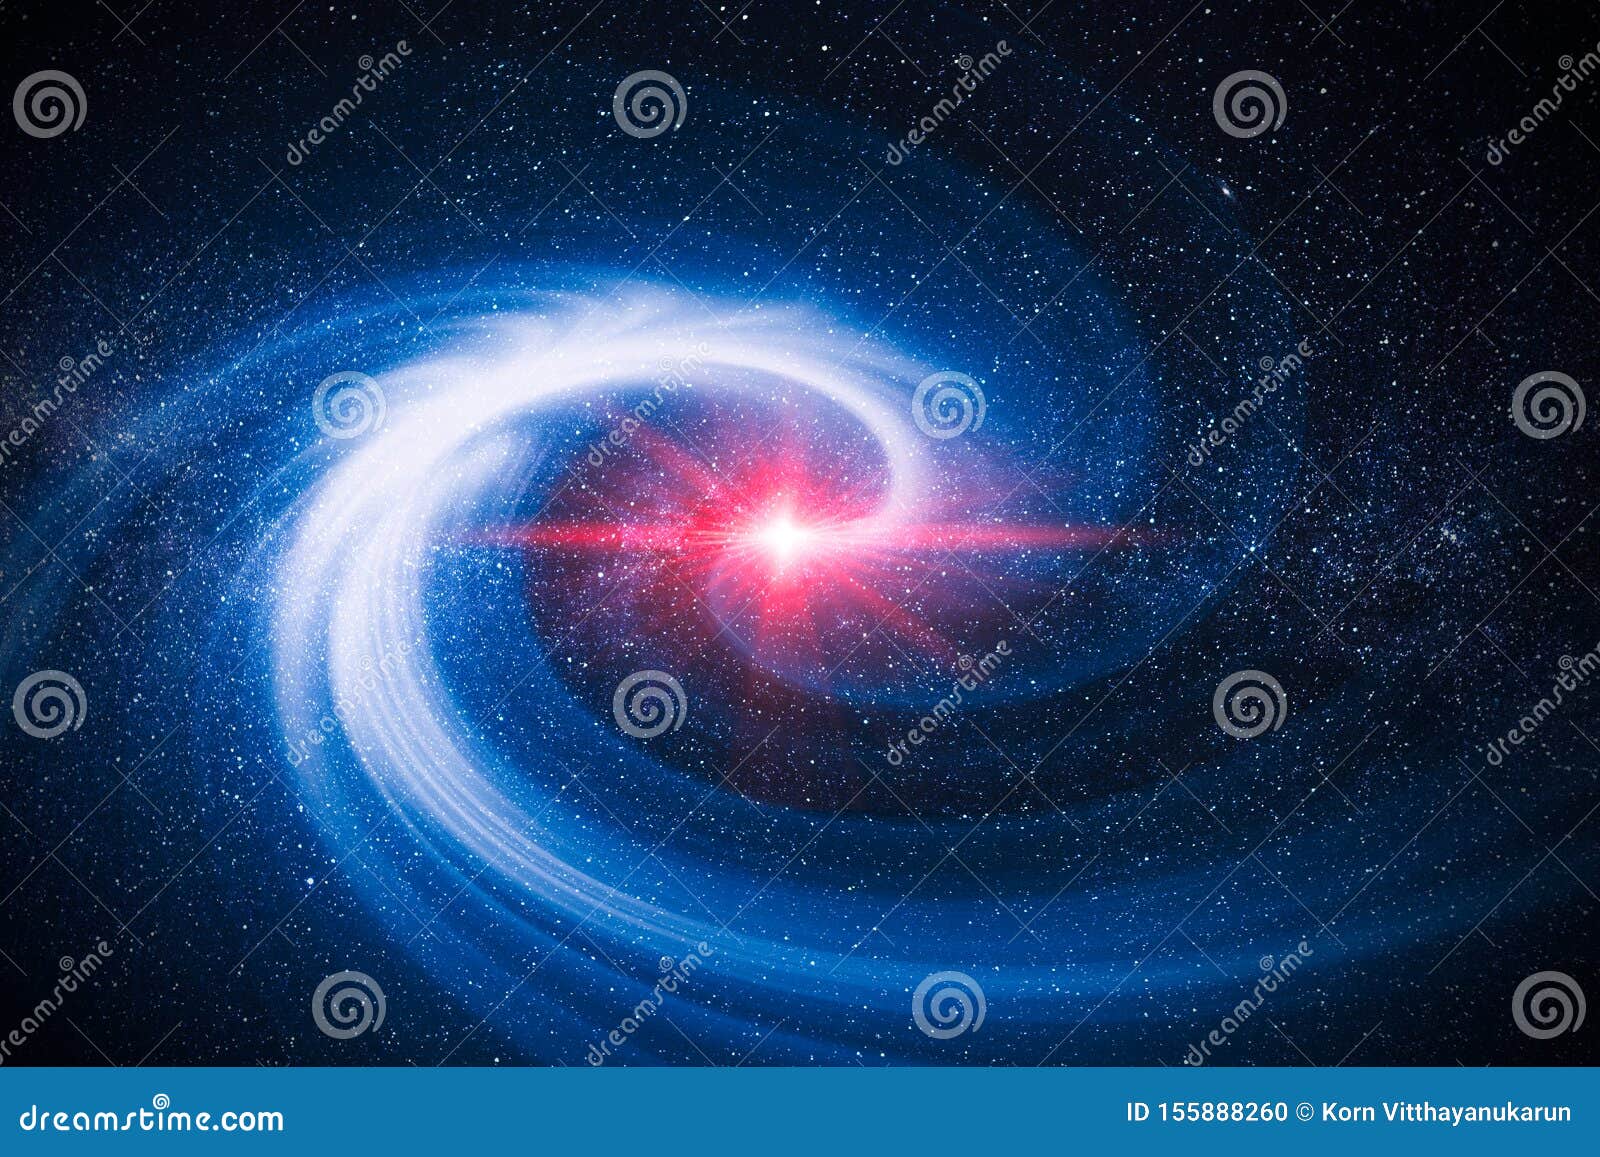  of cosmic rays and dust light from in the galaxy spinning spiral in to center of universe